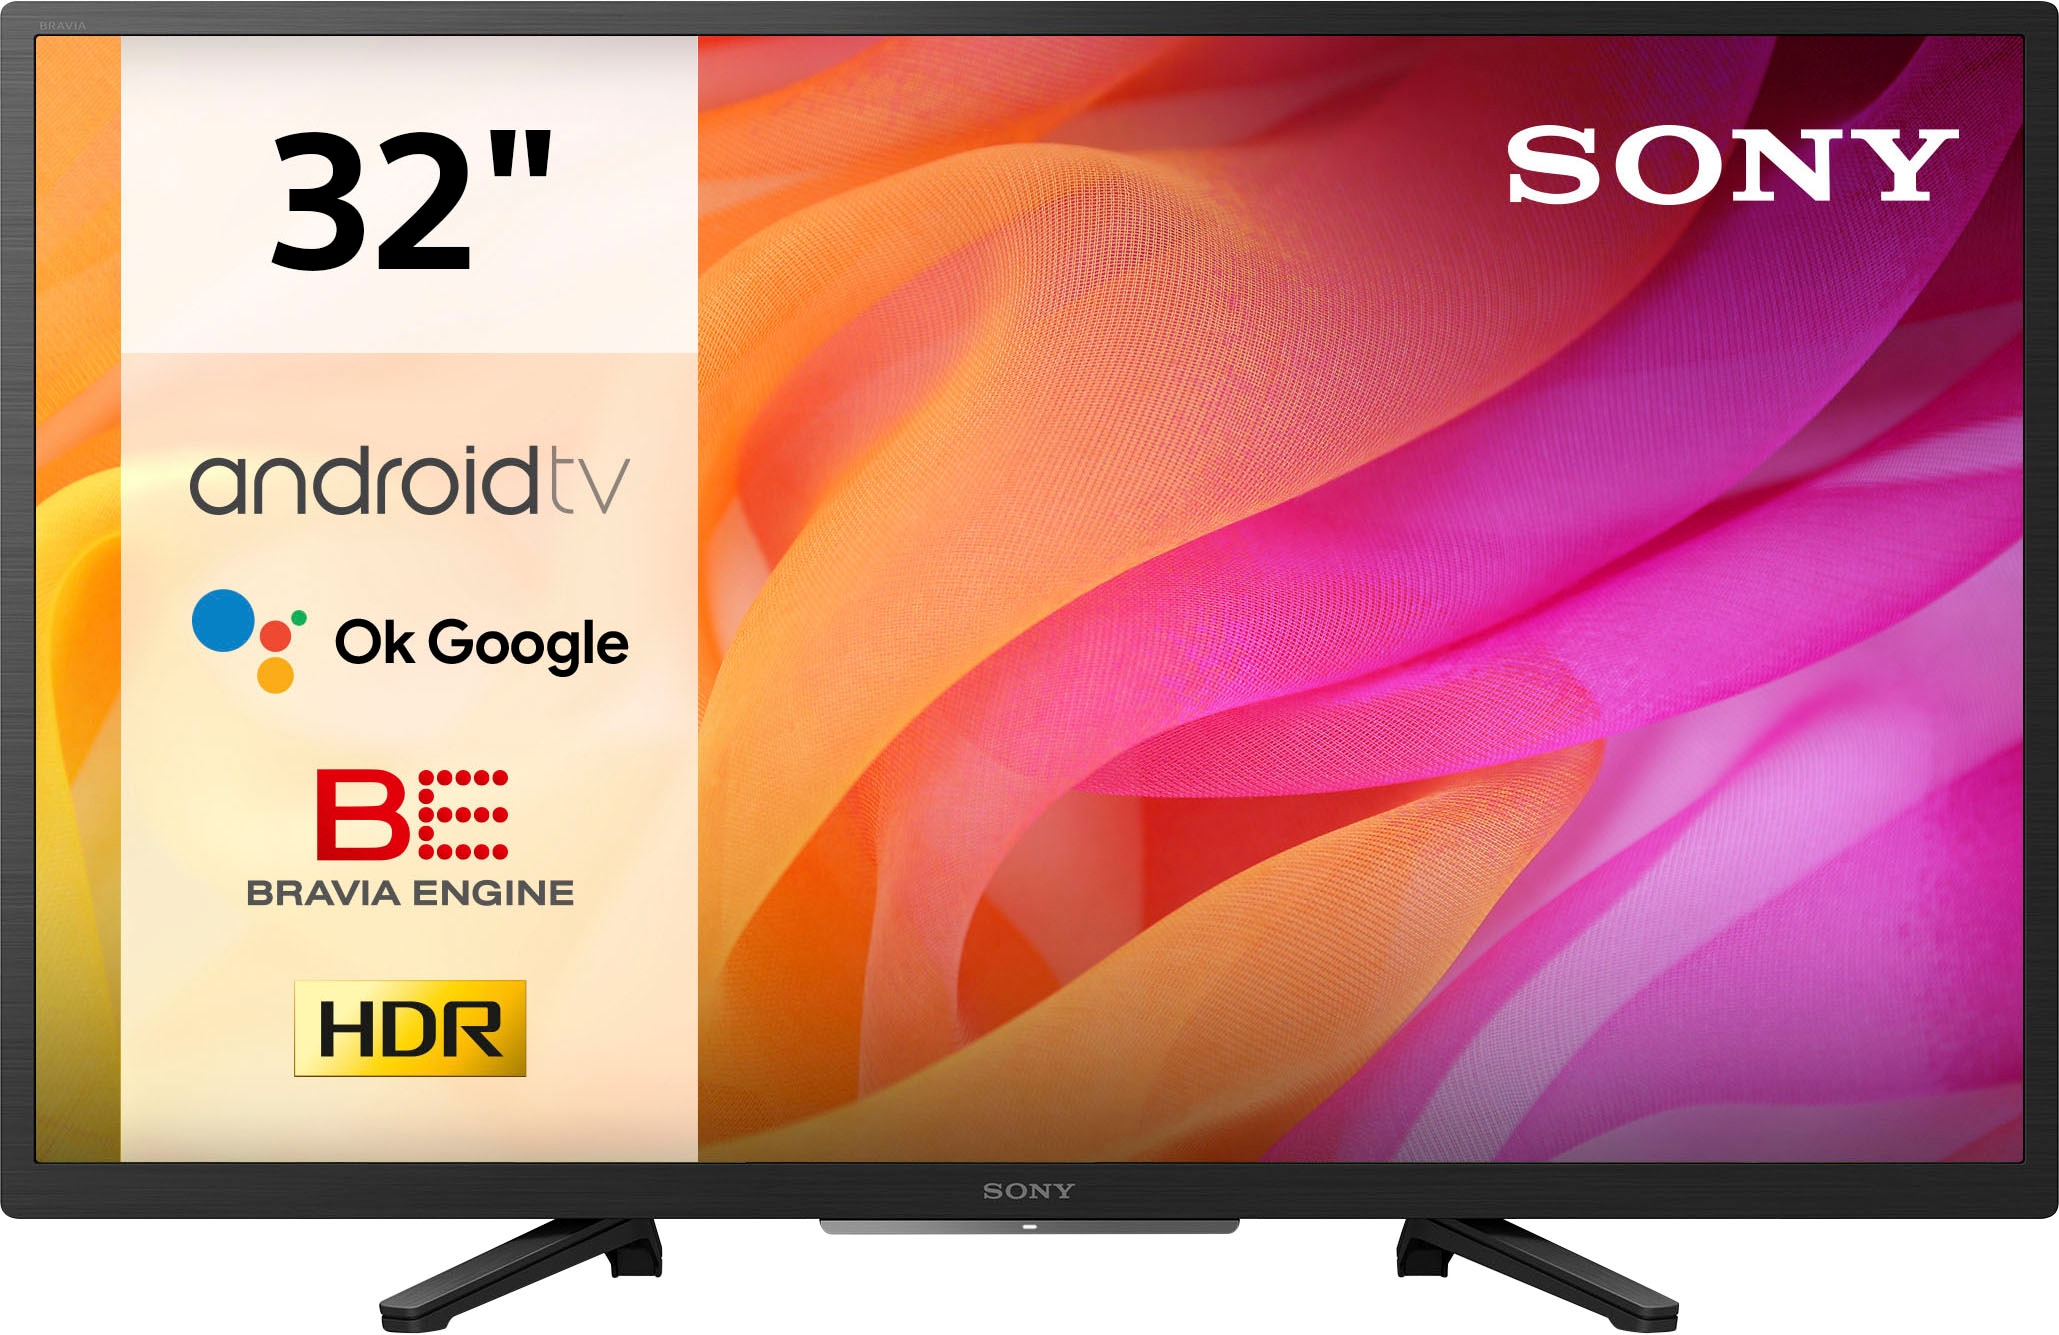 jetzt LCD-LED OTTO cm/32 Fernseher bei Zoll, Smart HD TV, HDR »KD-32800W/1«, Triple BRAVIA, 80 Tuner, Heady, Android WXGA, TV, Sony